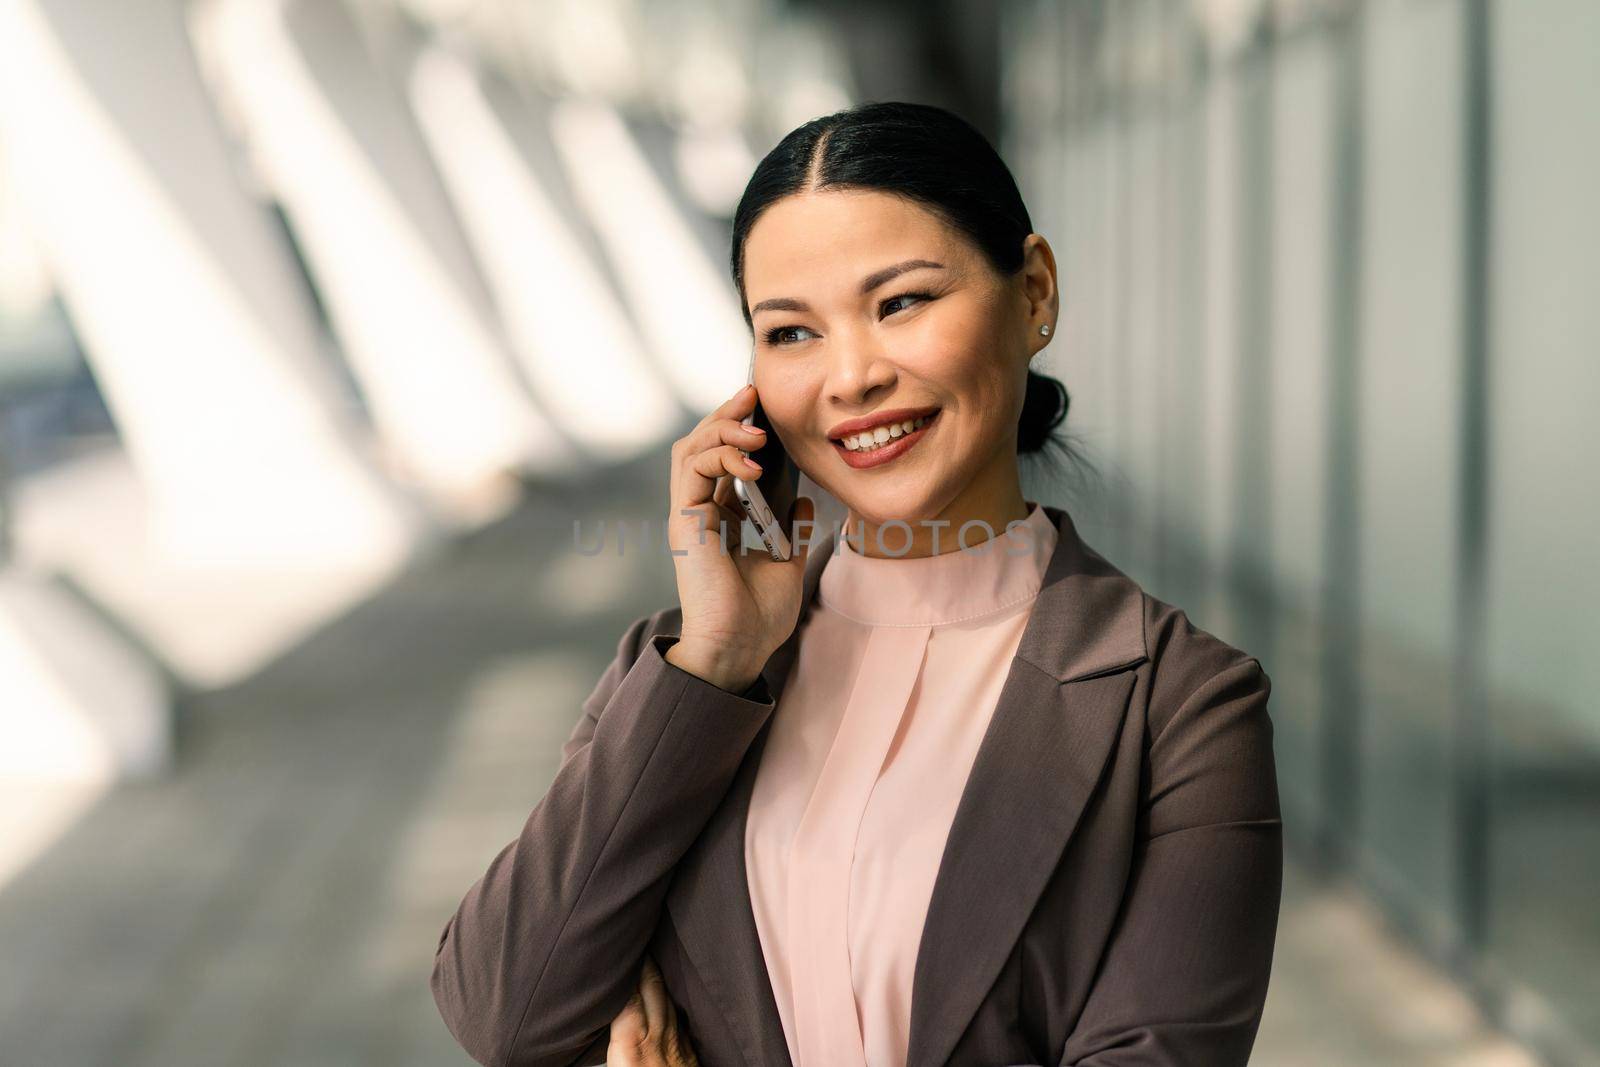 Smiling Asian businesswoman in suit talking on mobile phone against backdrop of business center. High quality photo.